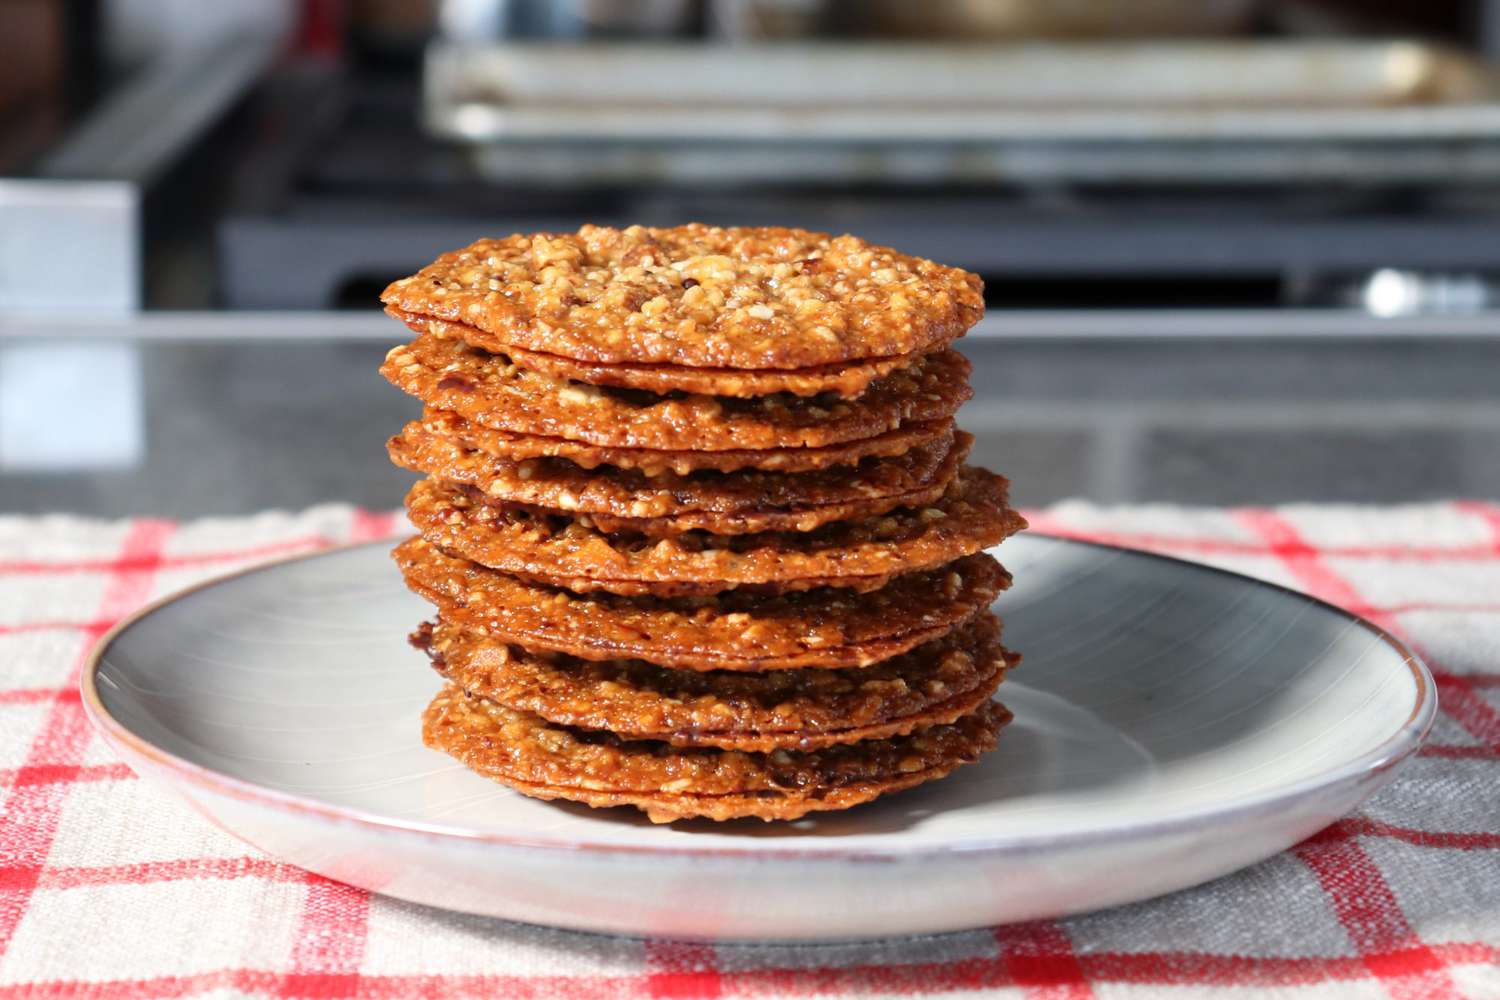 A stack of thin caramel-colored almond cookies